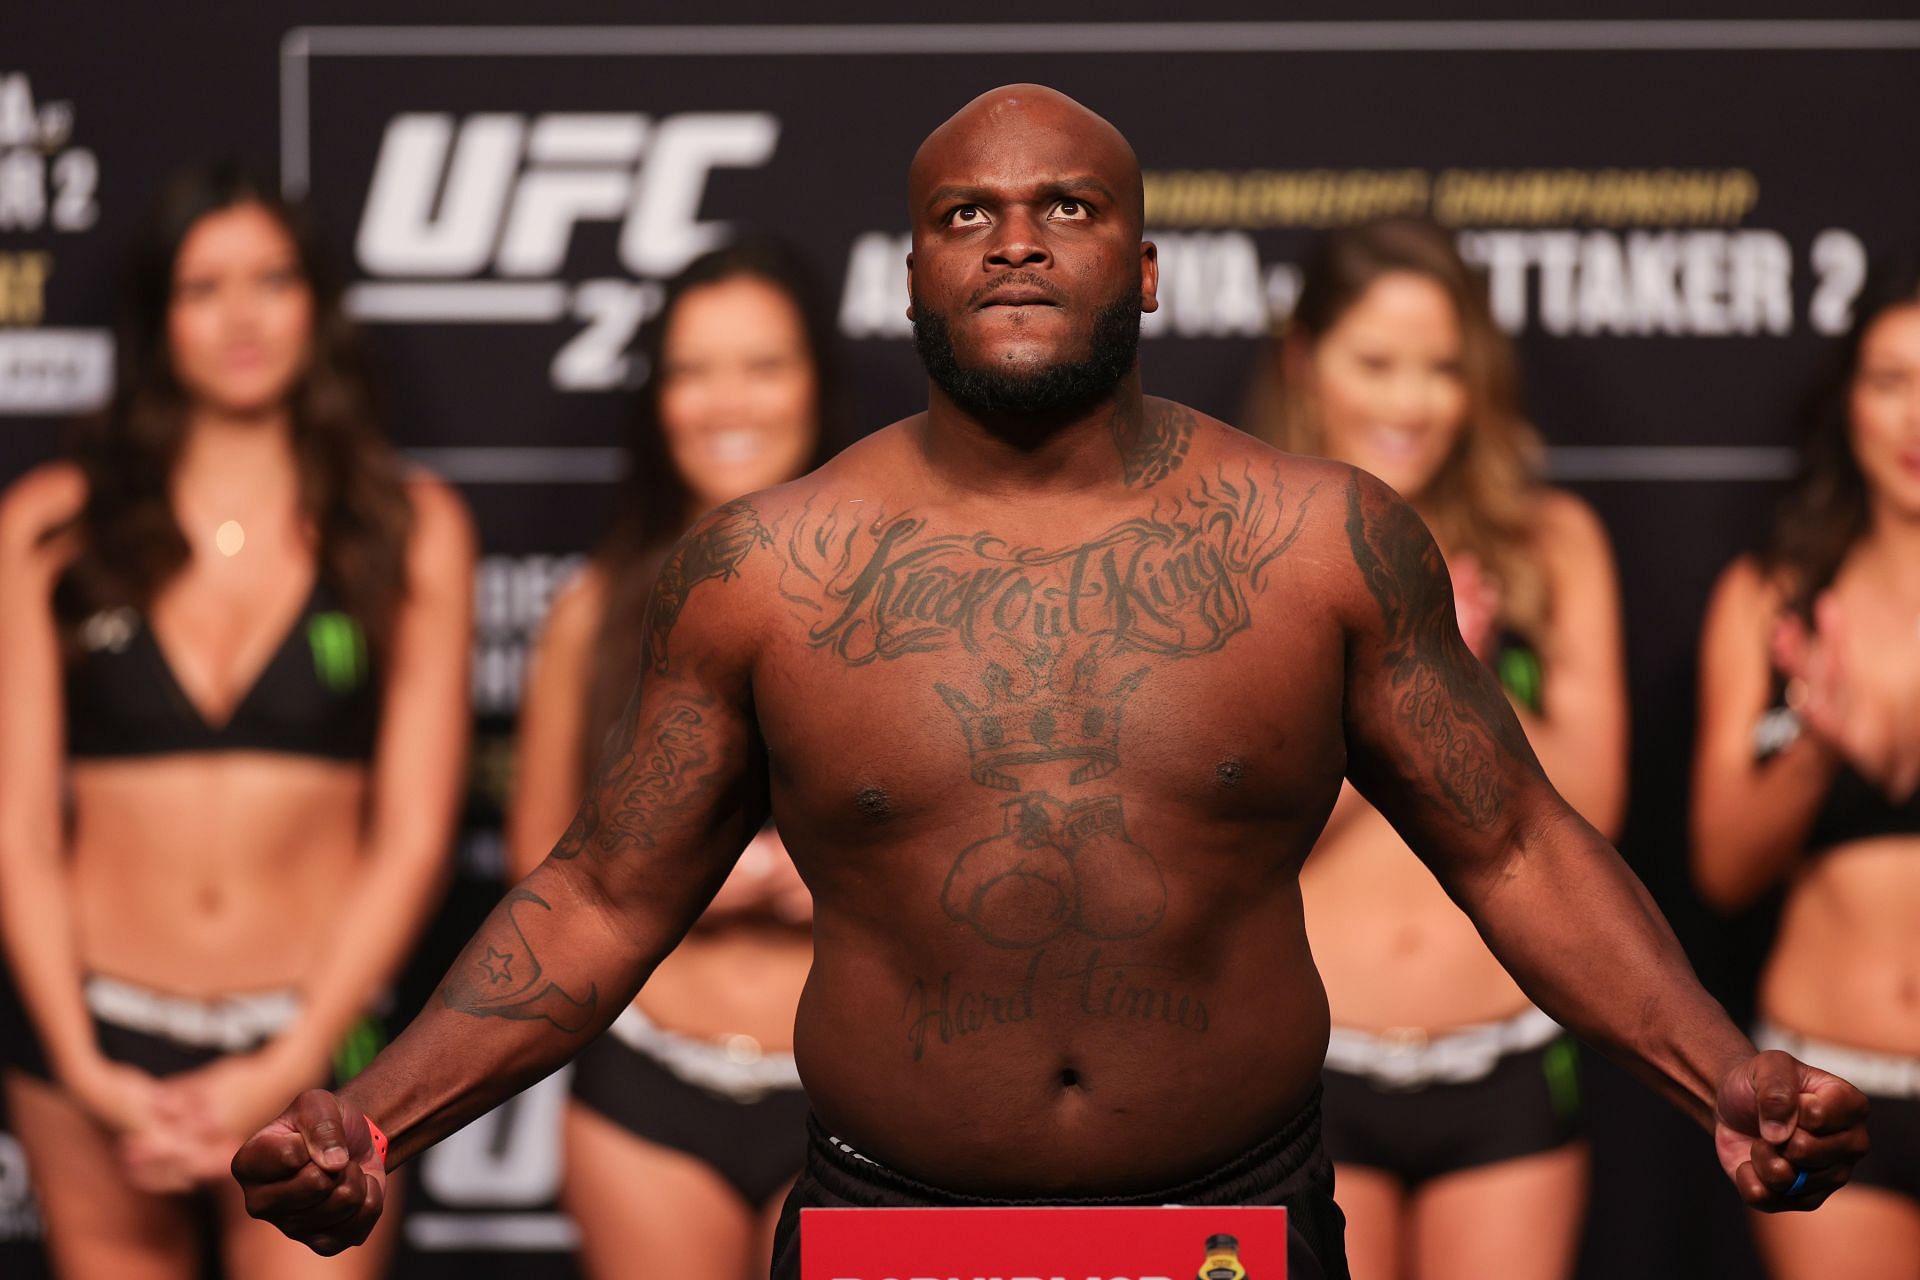 Derrick Lewis has appeared to struggle with his conditioning at times